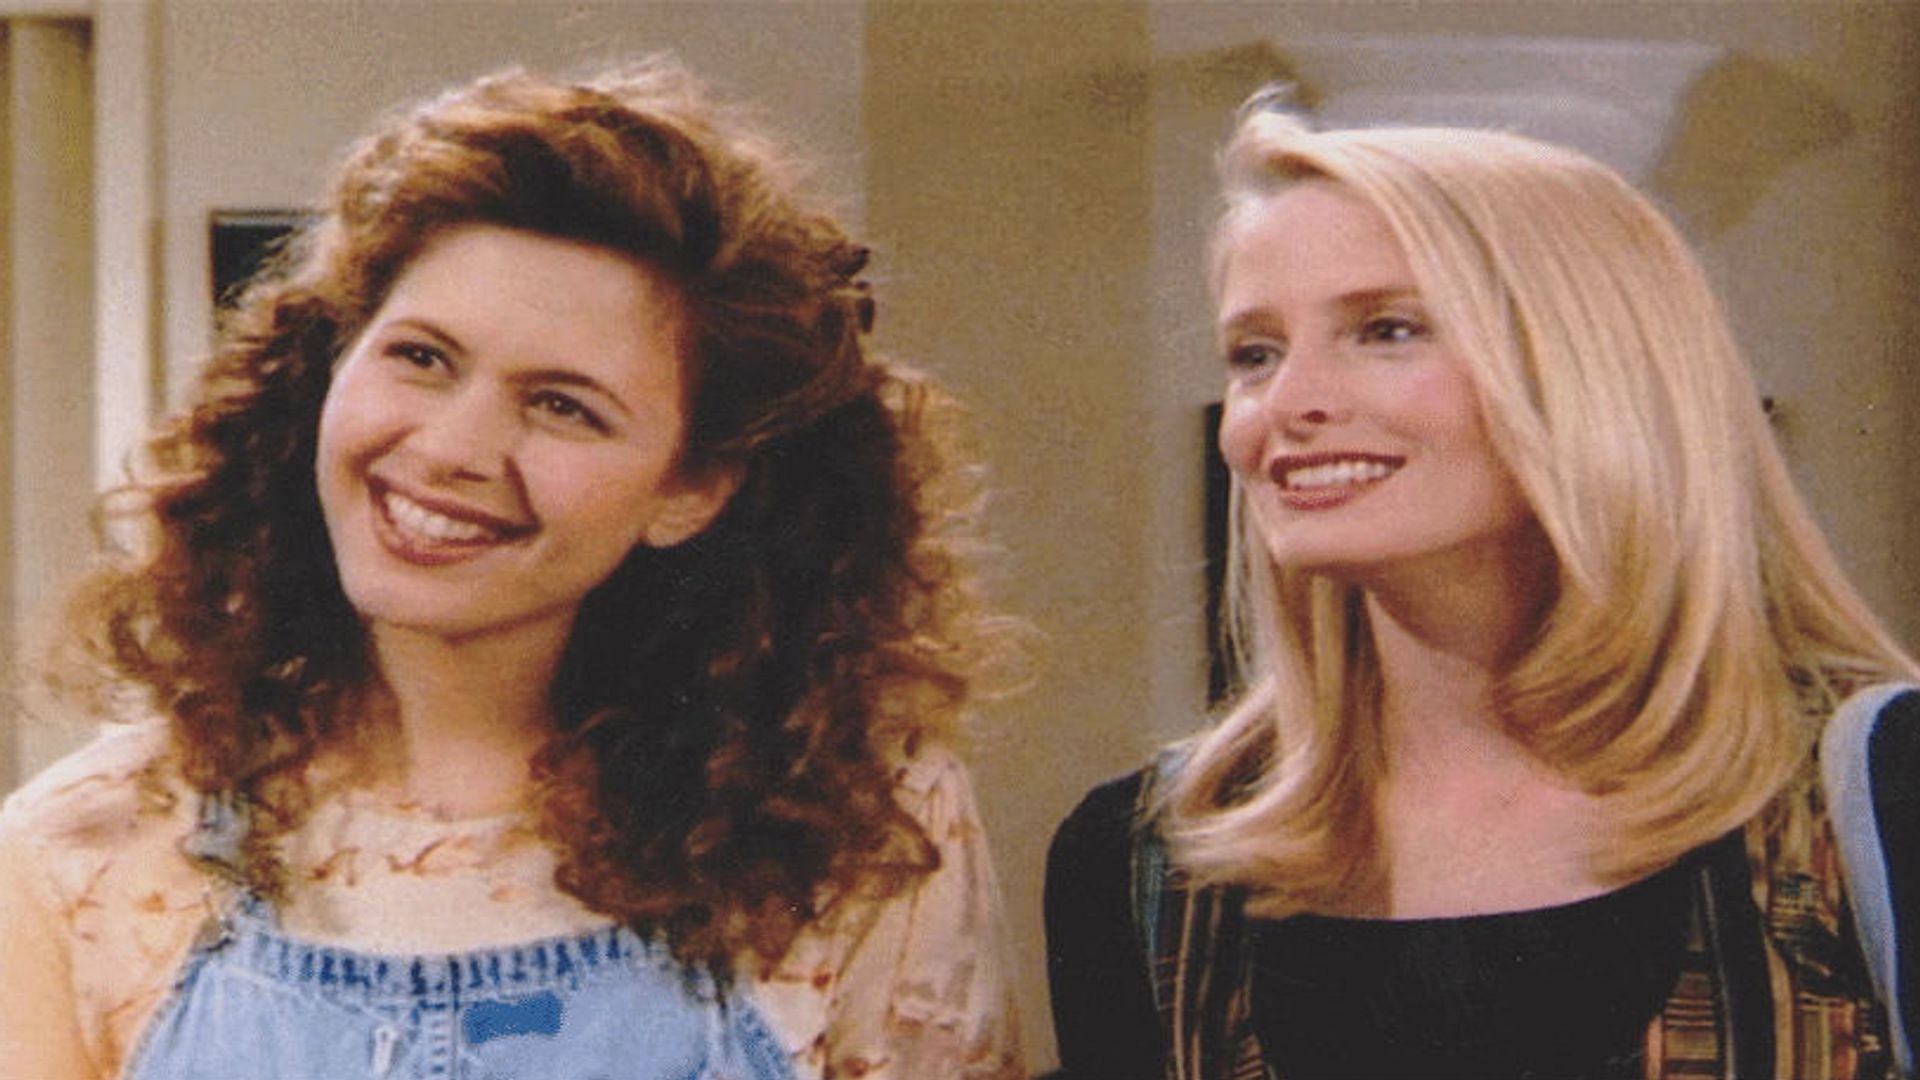 Still from Friends - Susan and Carol (Image via NBC)